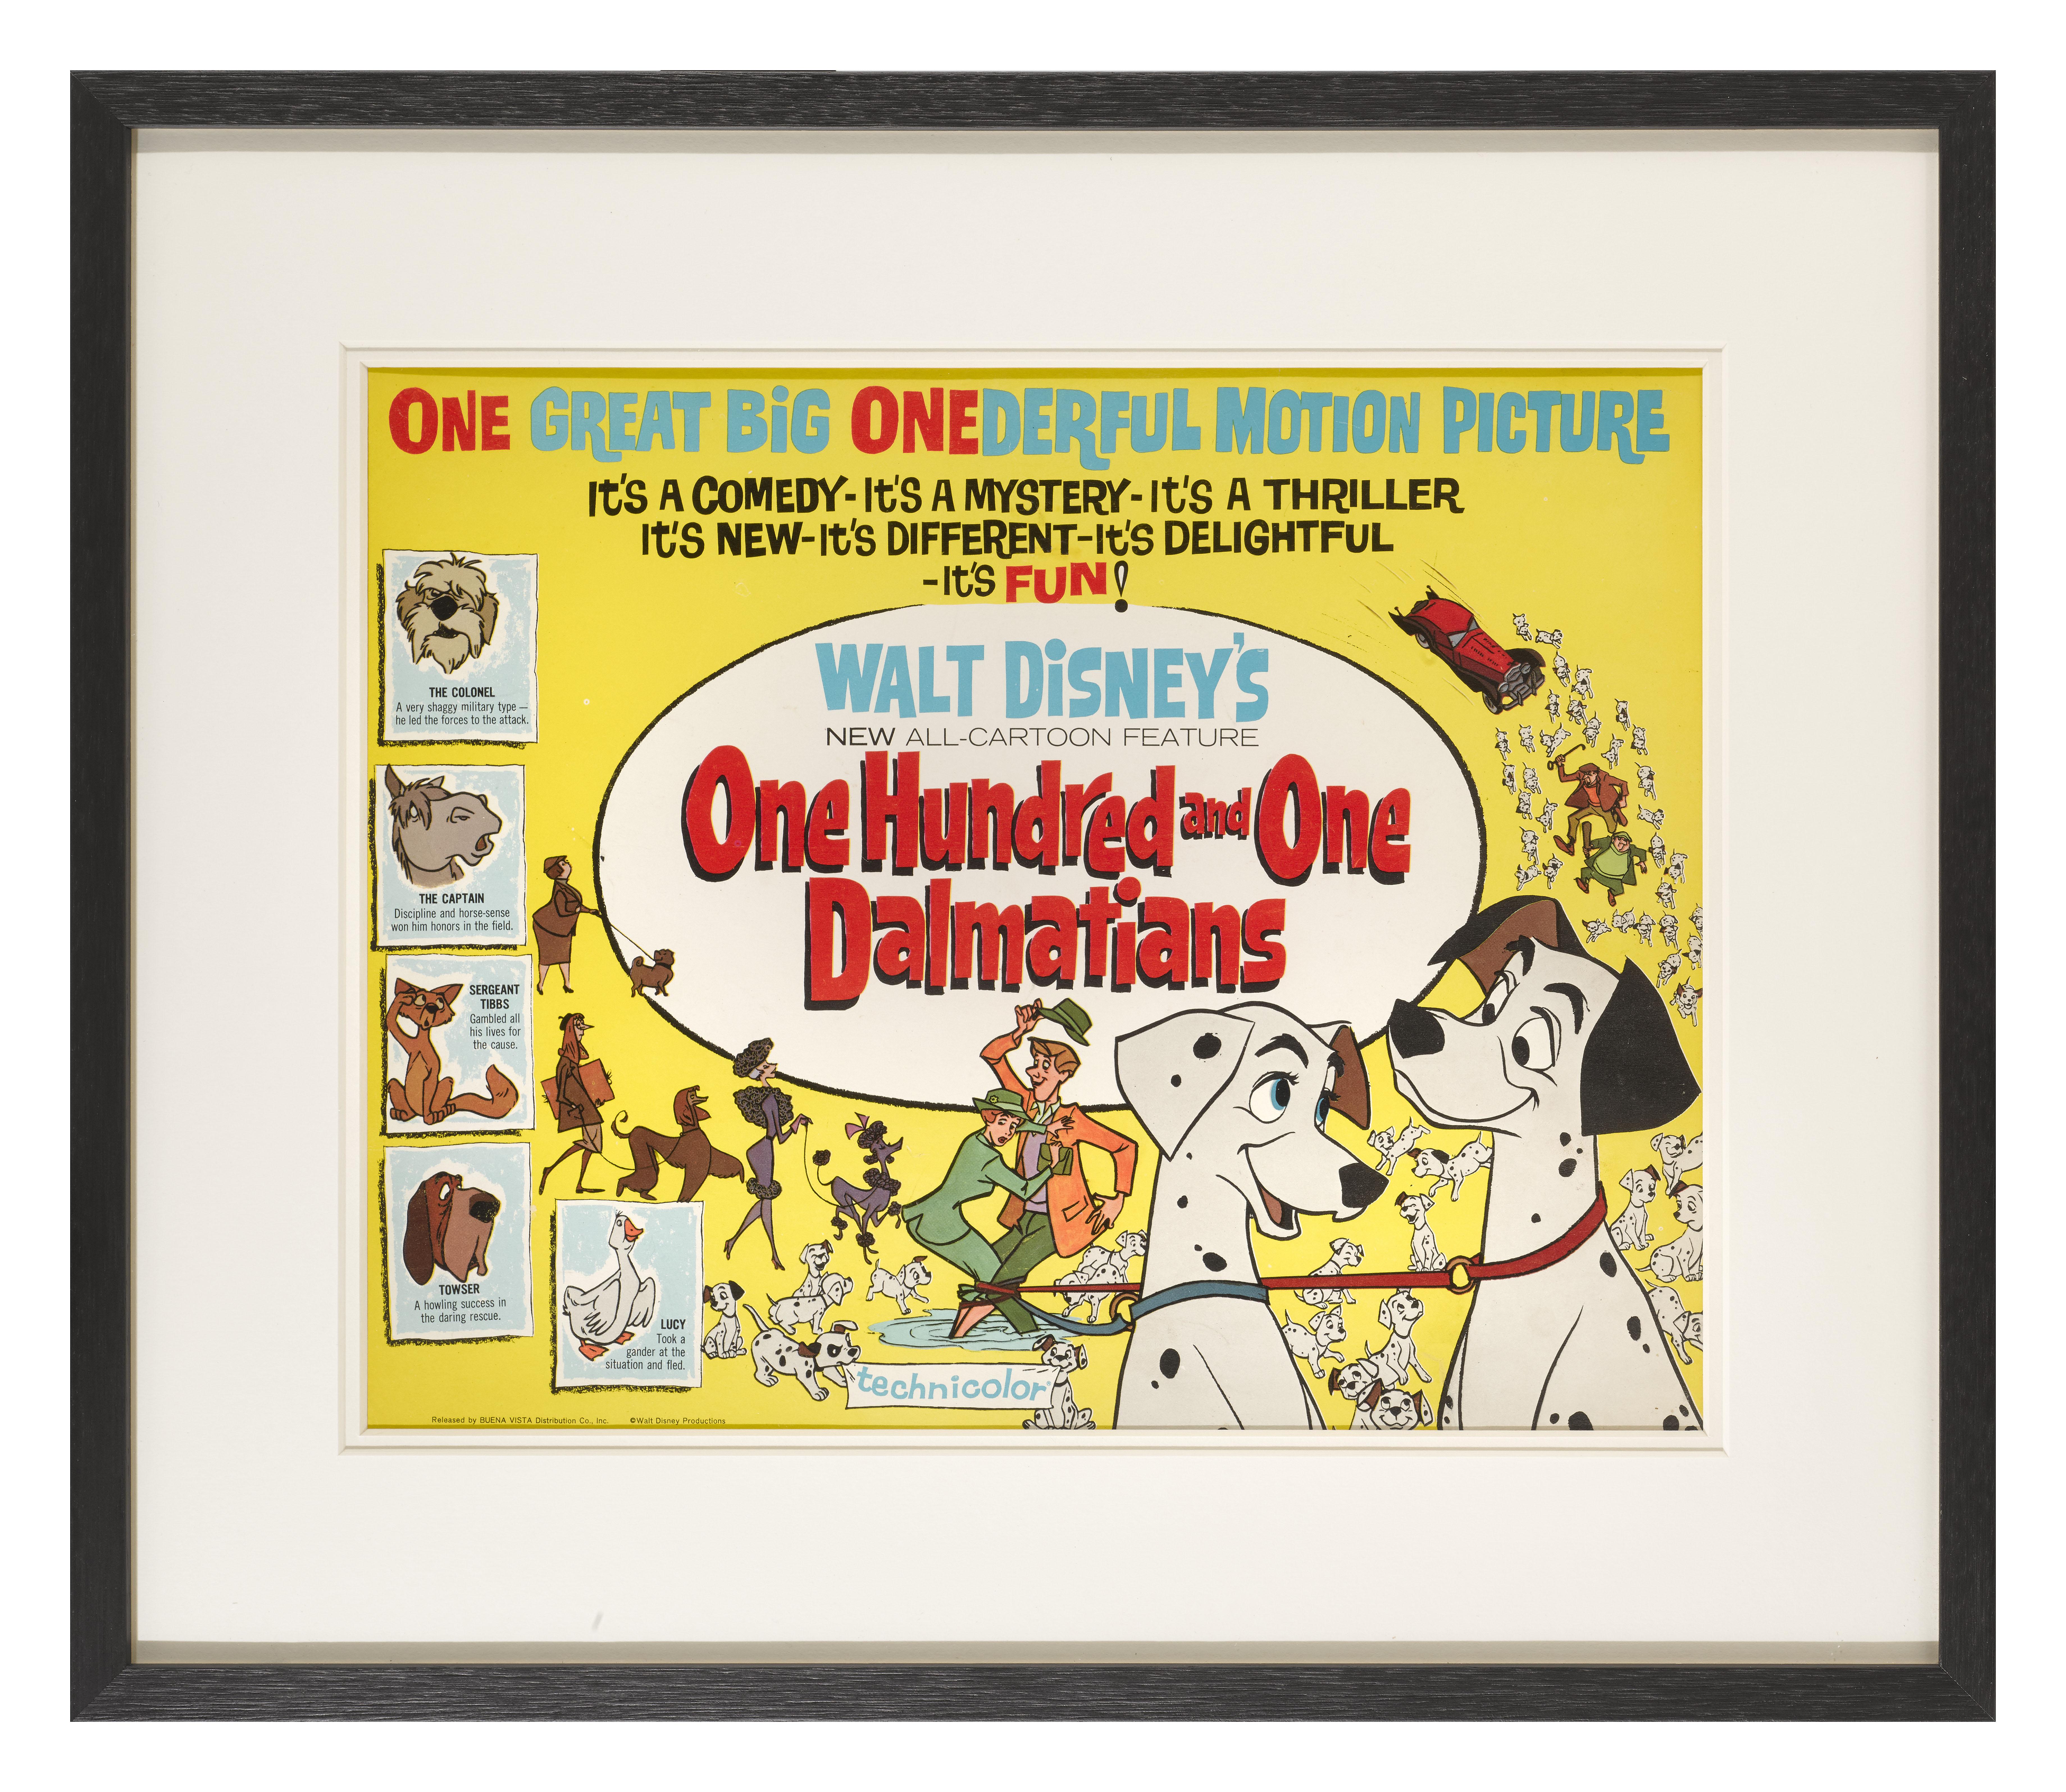 American One Hundred and One Dalmatians For Sale